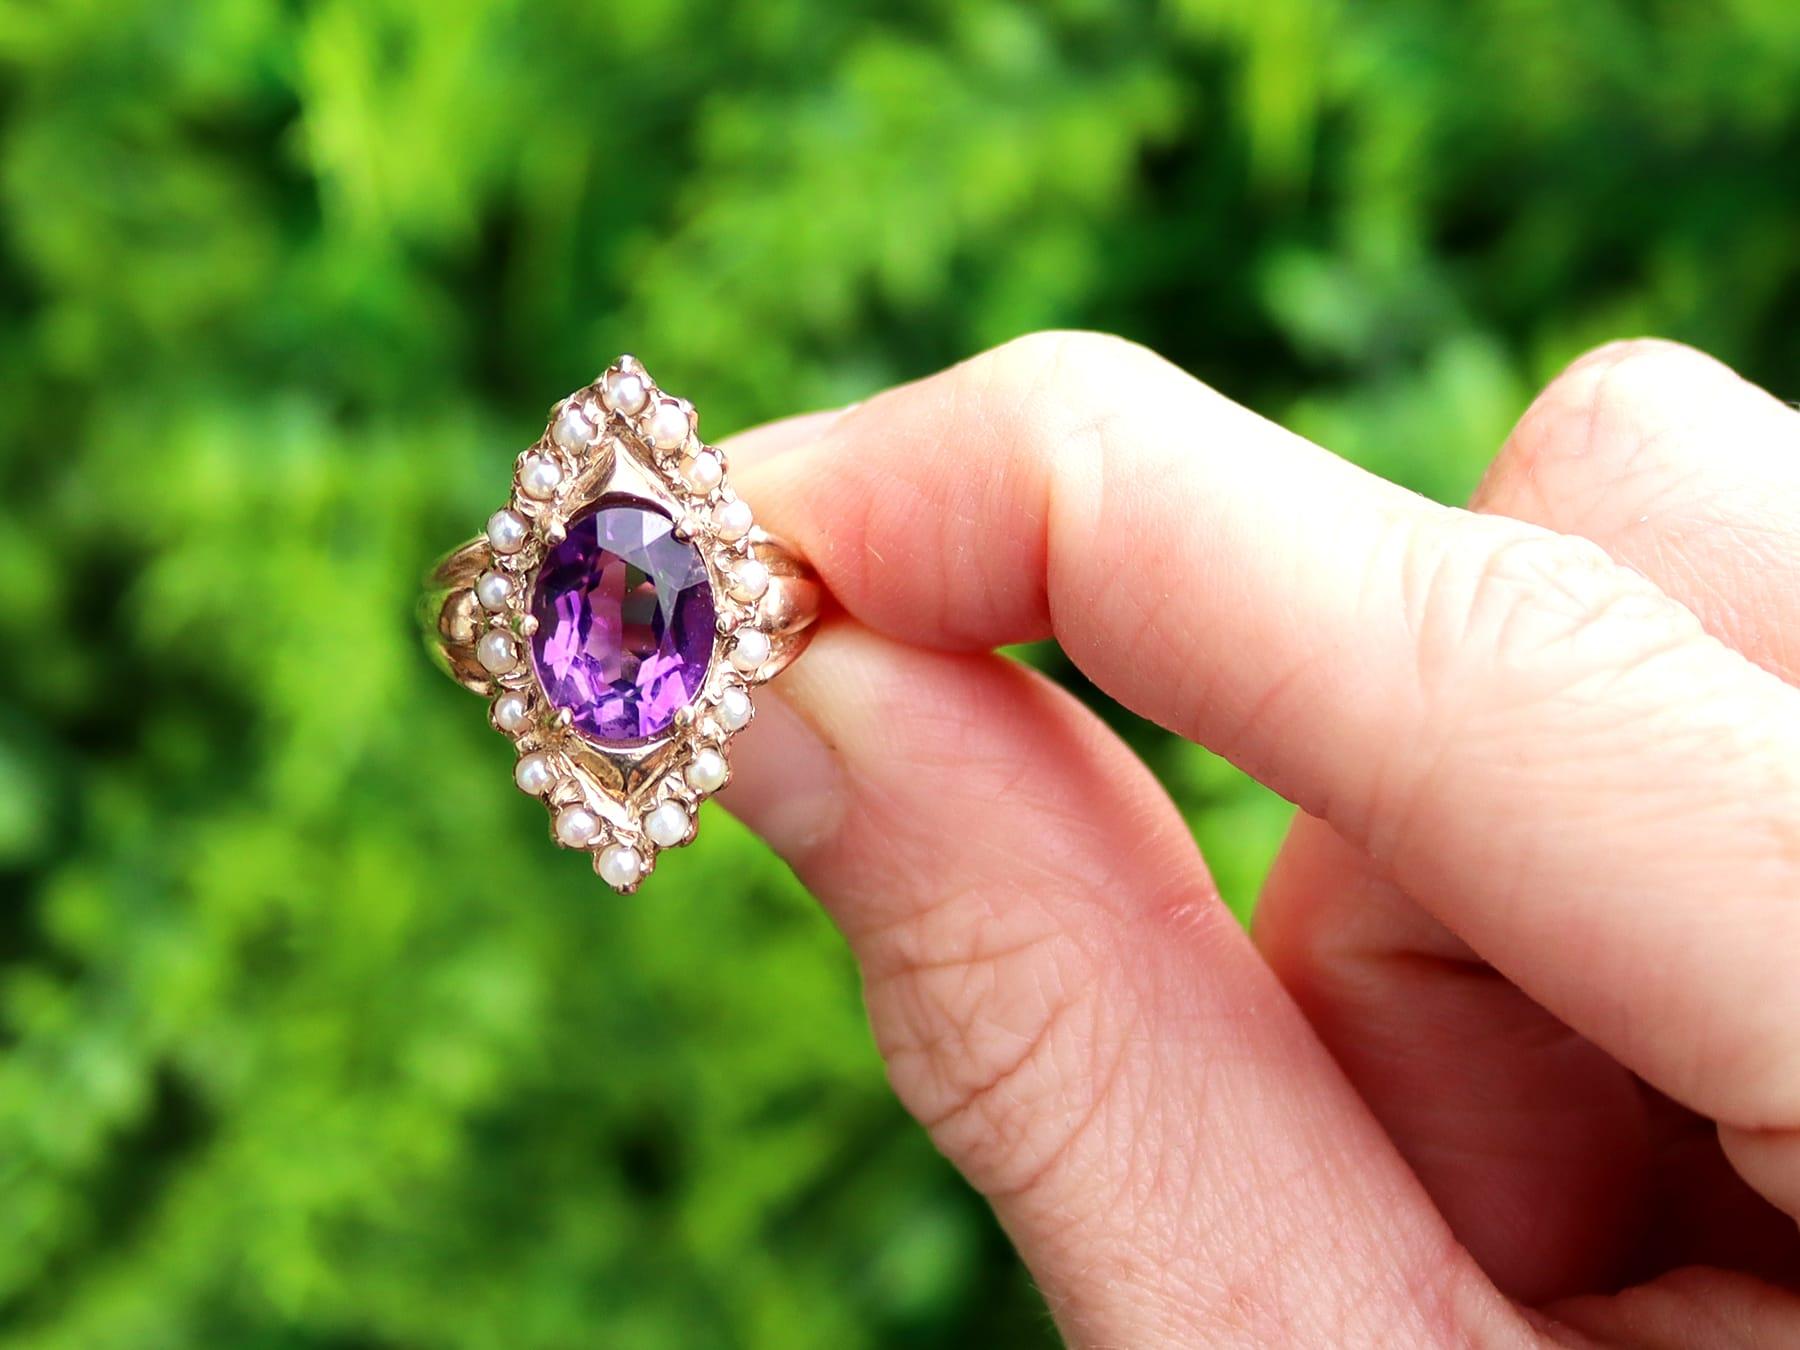 A fine and impressive vintage 2.51 carat natural amethyst and seed pearl dress ring in 9 karat yellow gold; part of our diverse range of vintage jewelry and estate jewelry.

This impressive vintage pearl and amethyst ring has been crafted in 9k